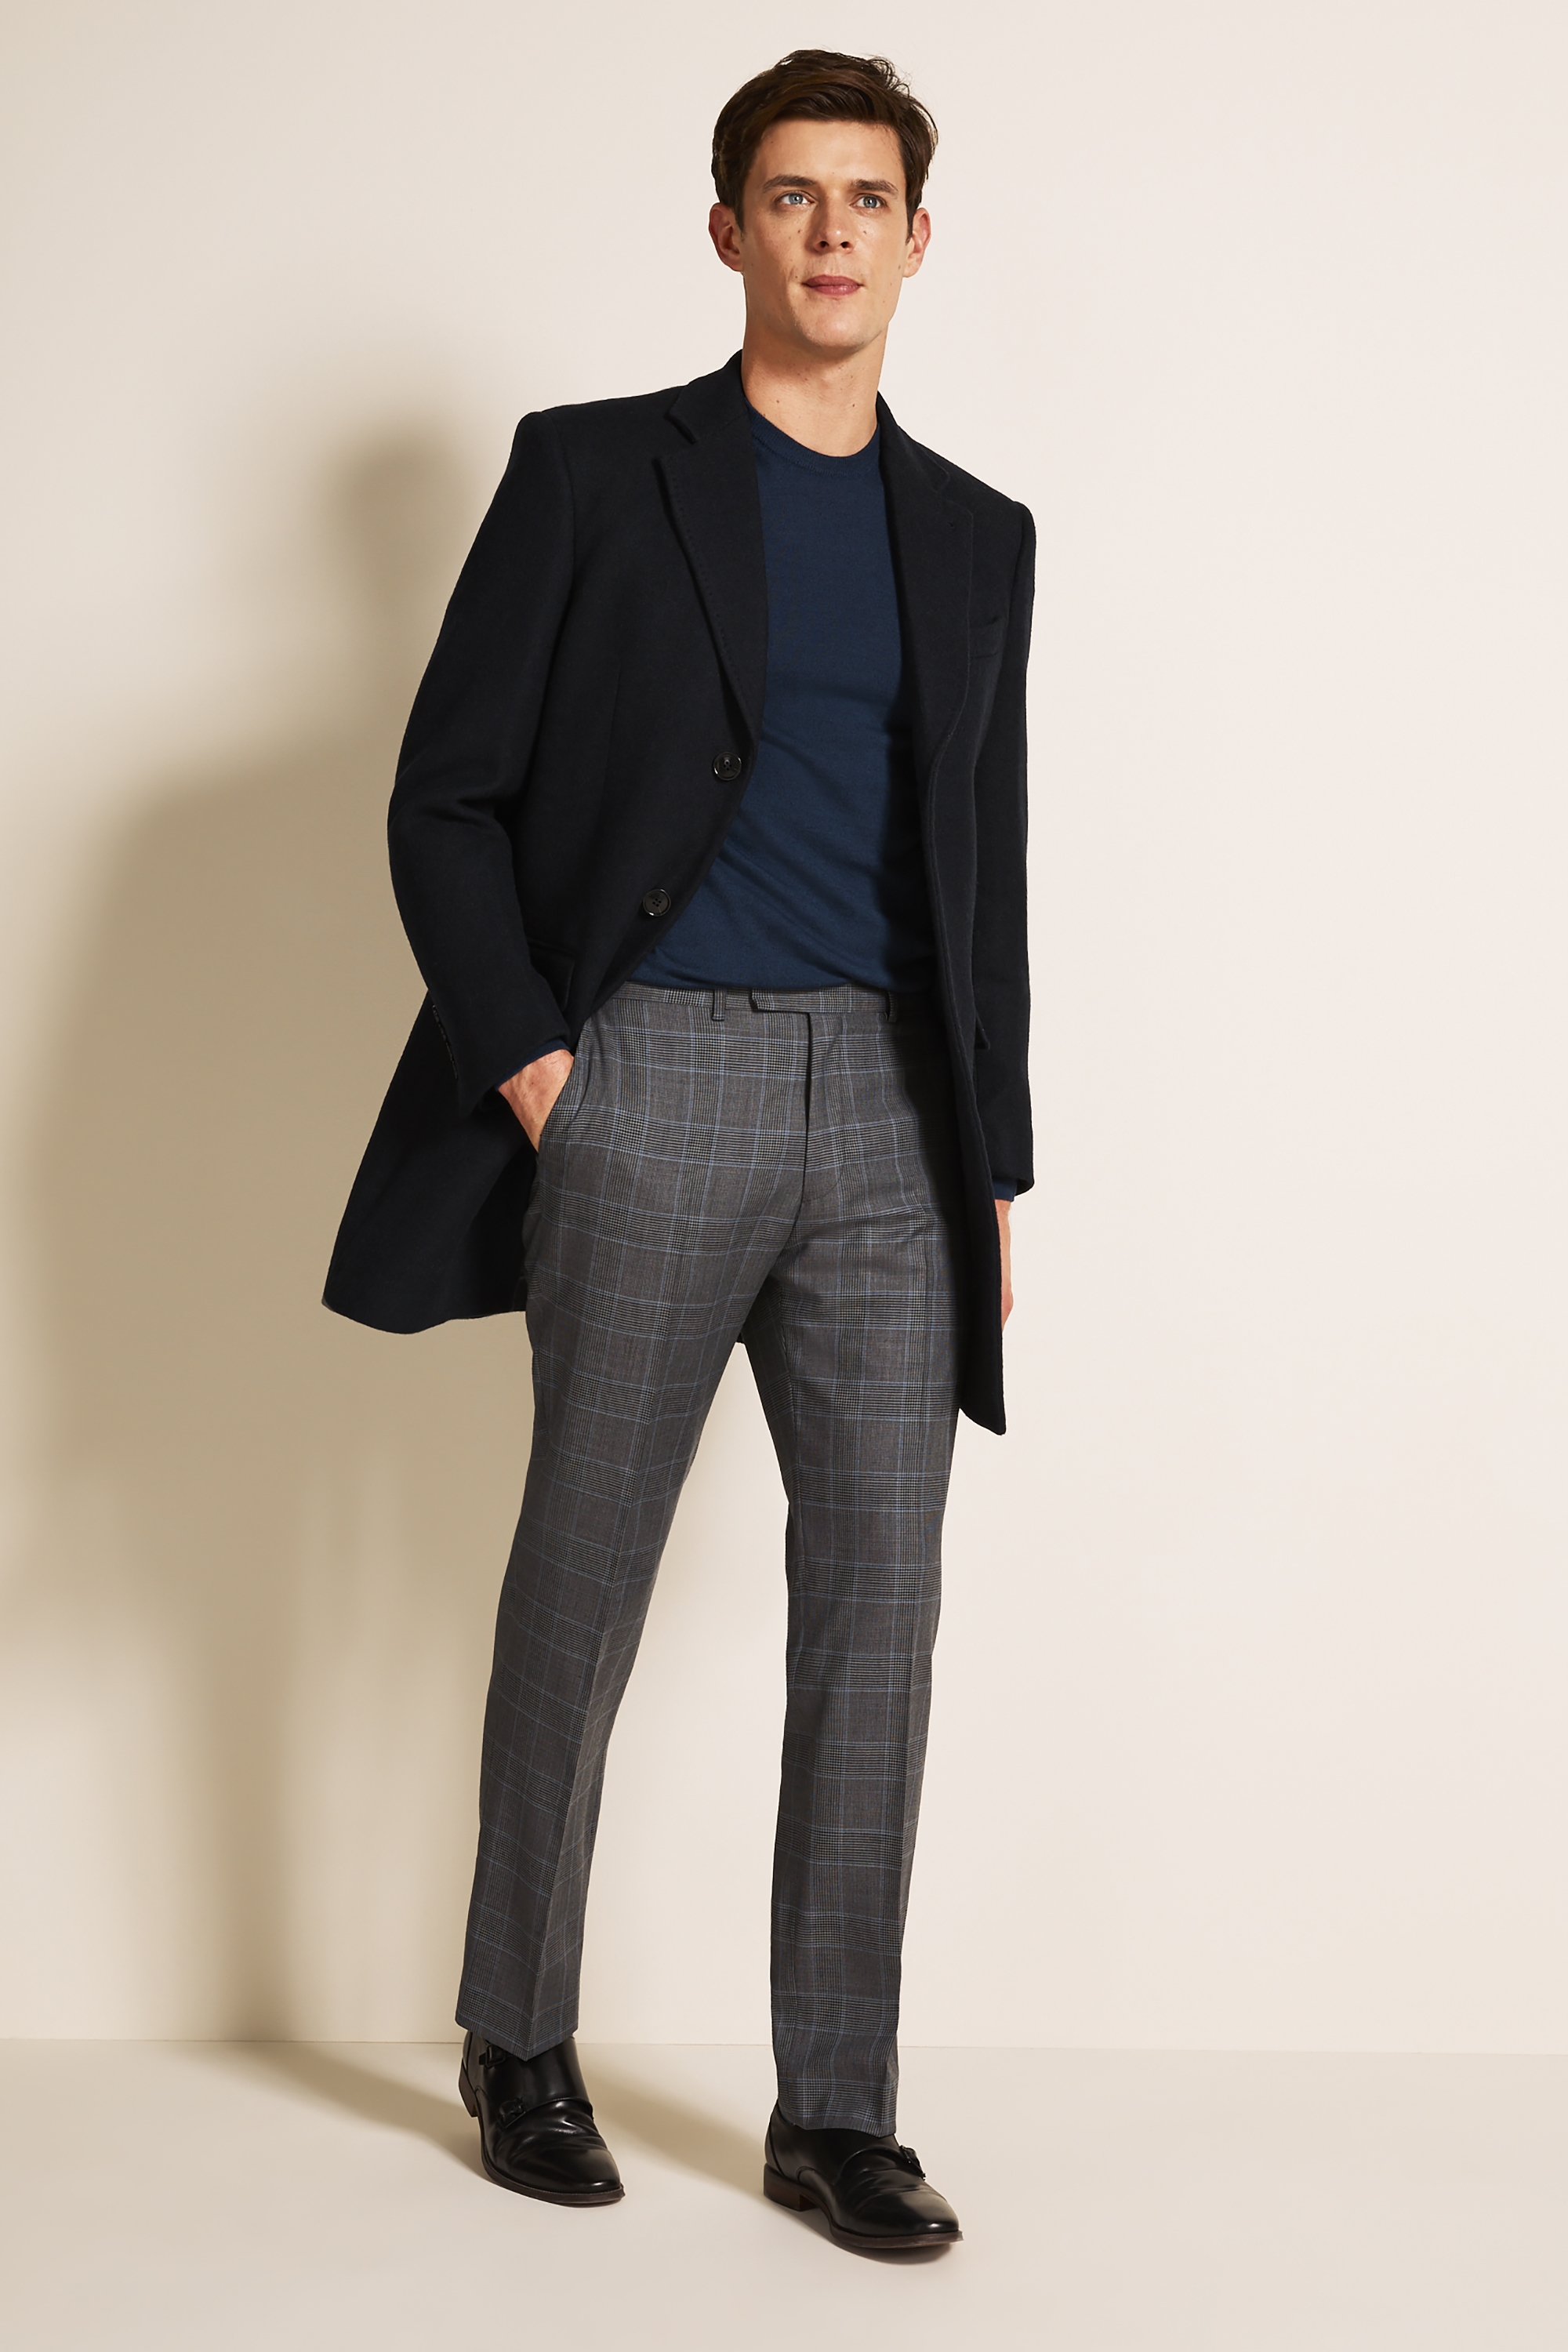 Moss 1851 Tailored Fit Navy Double Face with Check Overcoat